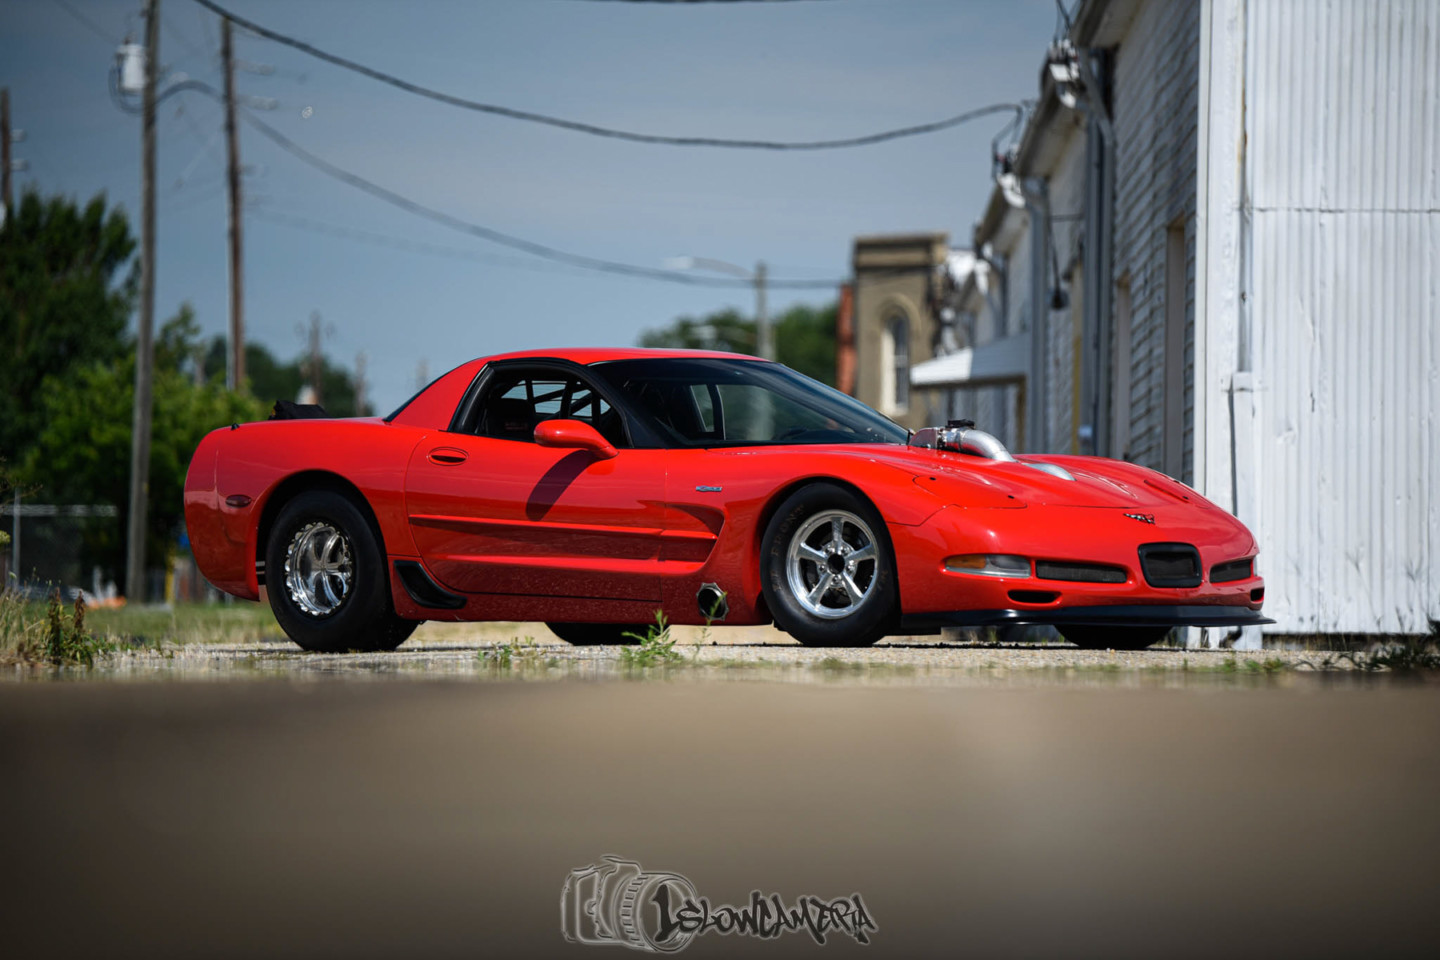 Ford Muscle: Featured Article! "Double Agent: Michael Sellars' Ford-Powered 2001 Z06 Corvette"